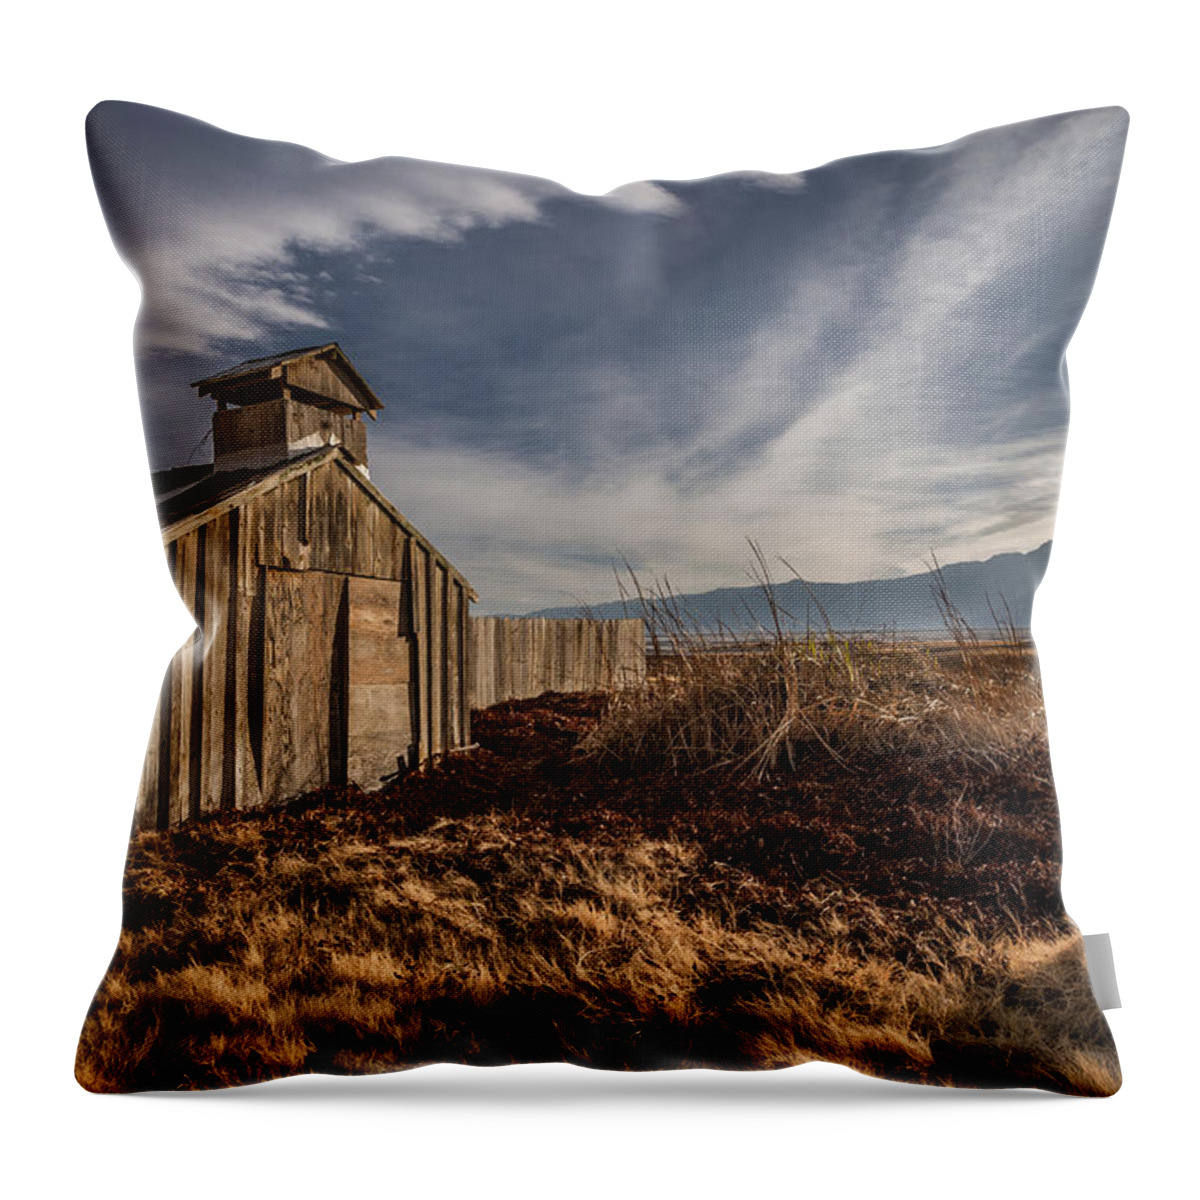 Clouds Throw Pillow featuring the photograph Keeler Swim Club by Cat Connor